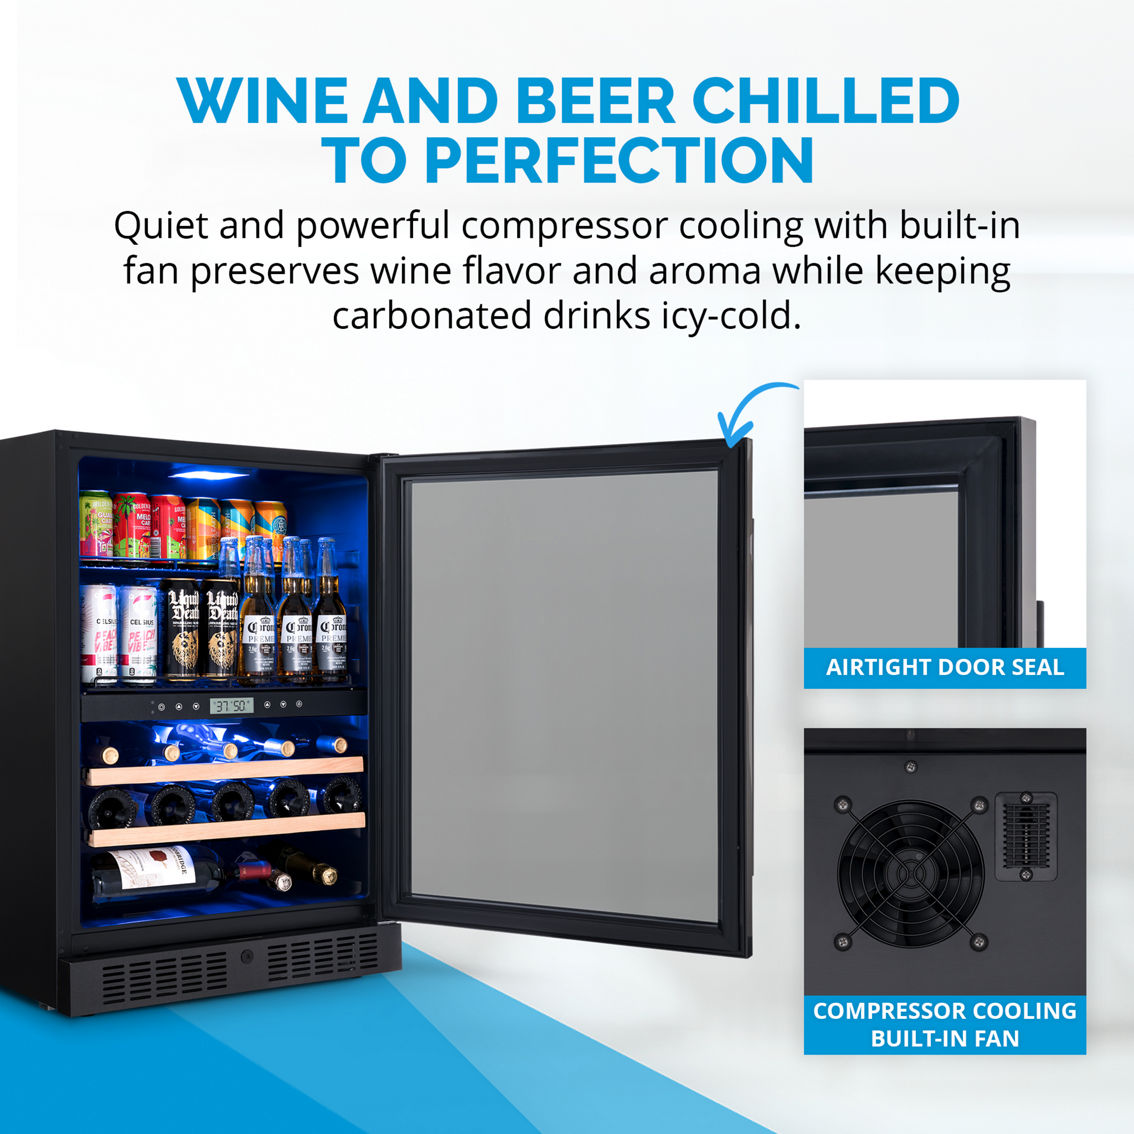 New Air 24 in. Wine and Beverage Refrigerator - Image 6 of 8